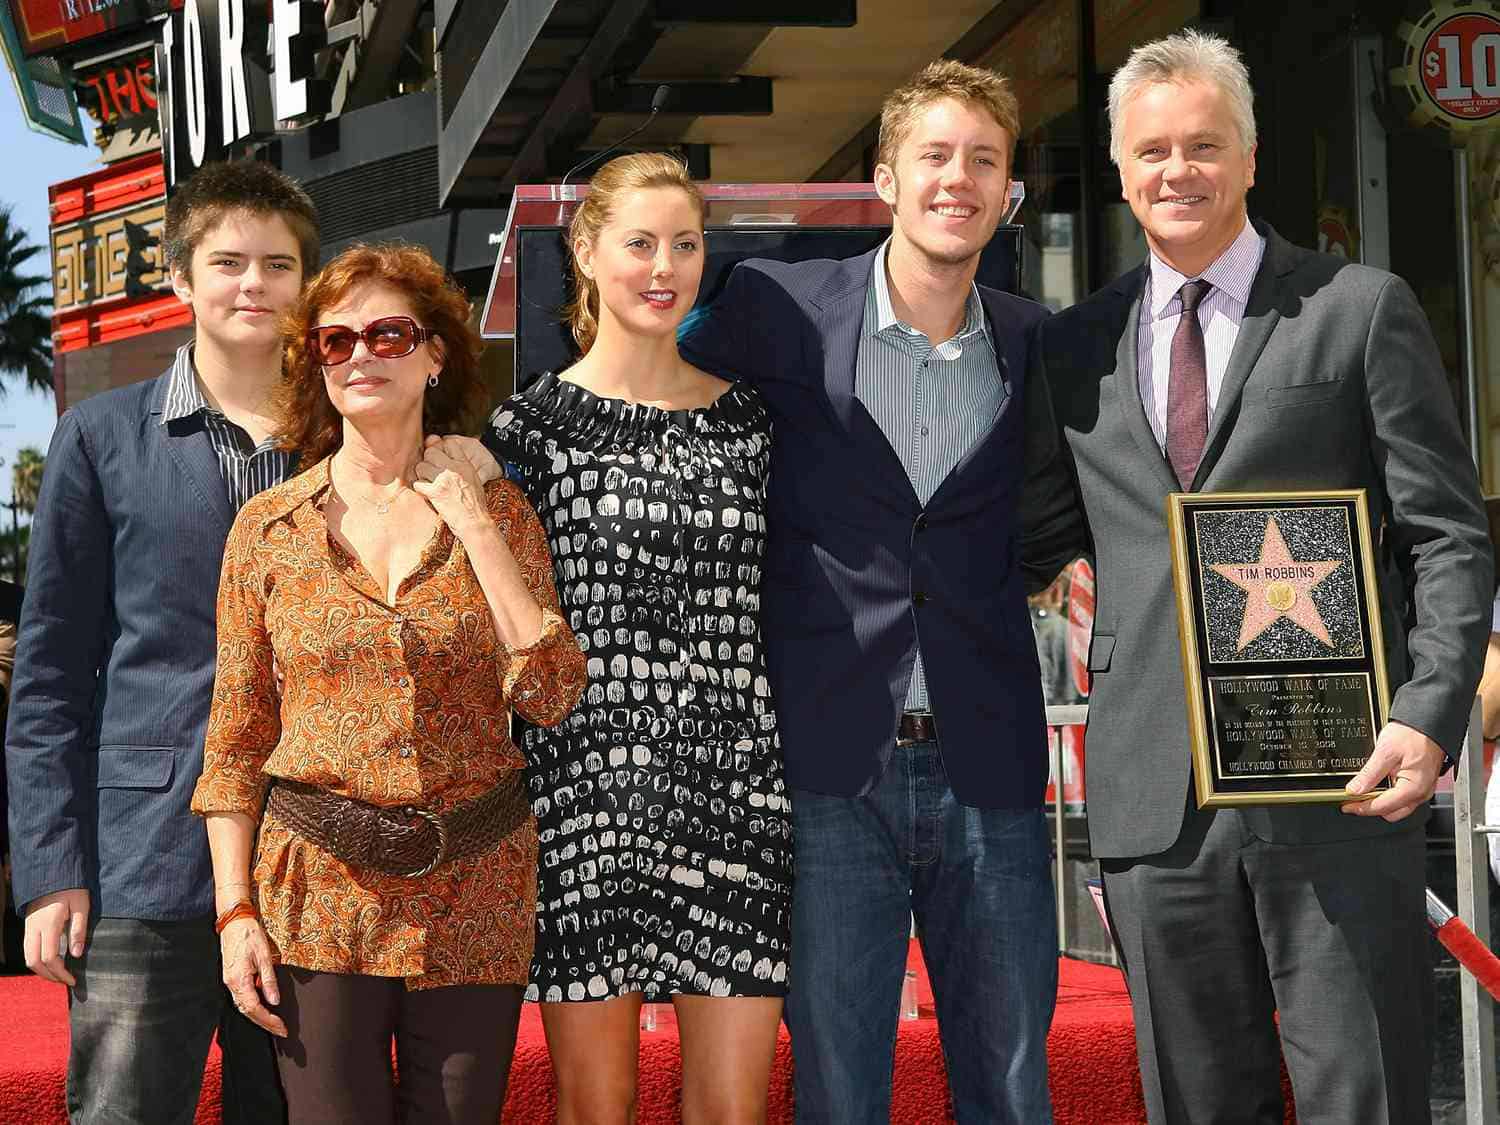 Tim Robbins's family and him